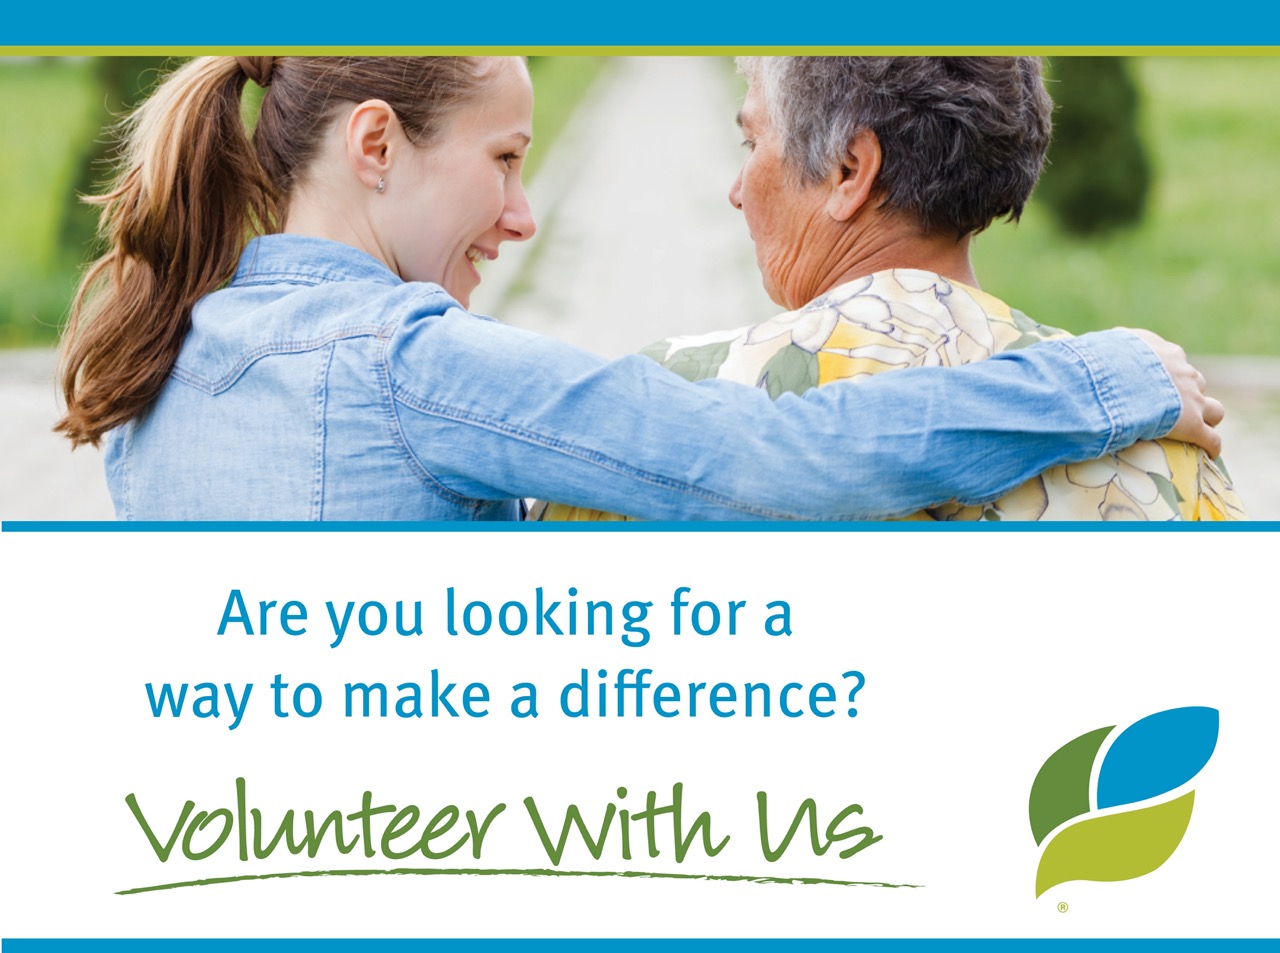 Are you looking for a way to make a difference? Volunteer With Us